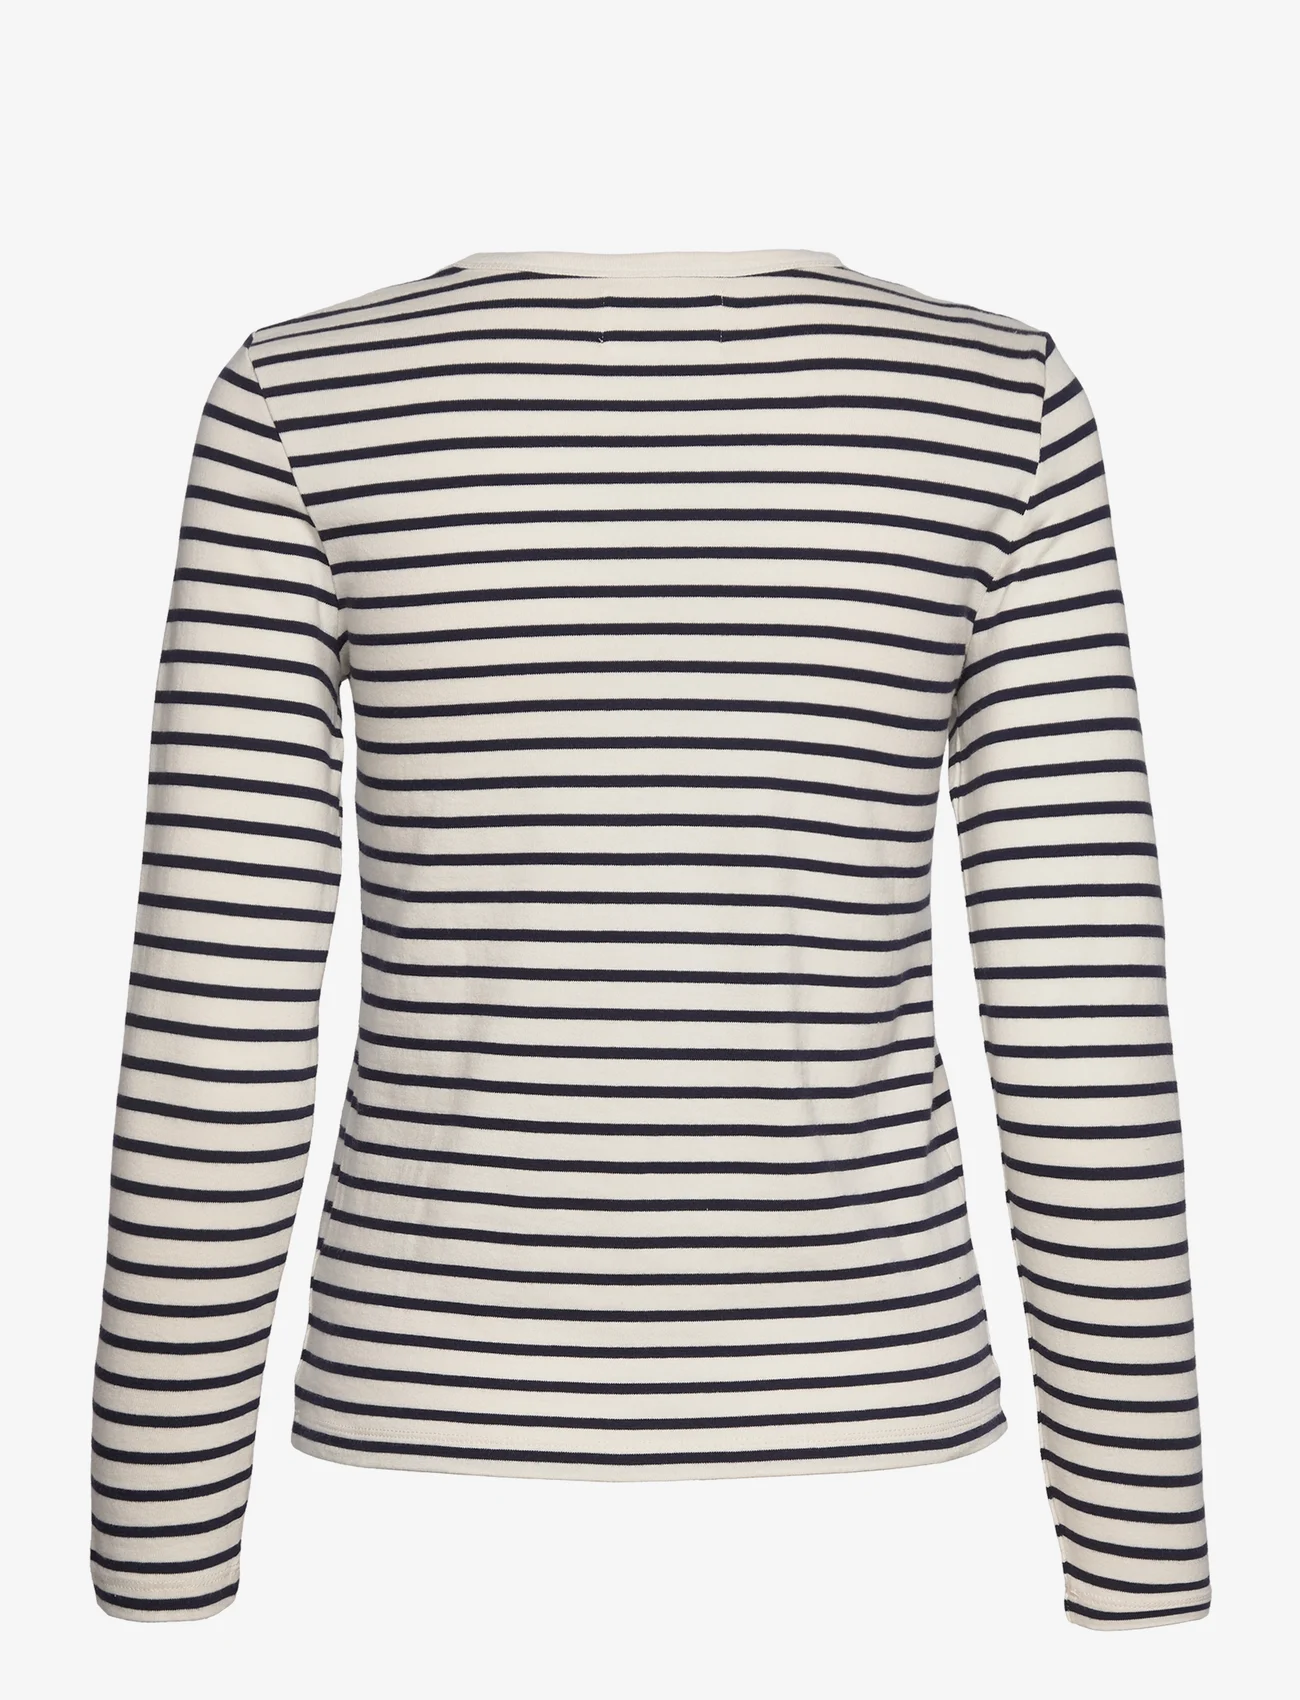 Double A by Wood Wood - Moa stripe long sleeve GOTS - t-shirt & tops - off-white/navy stripes - 1